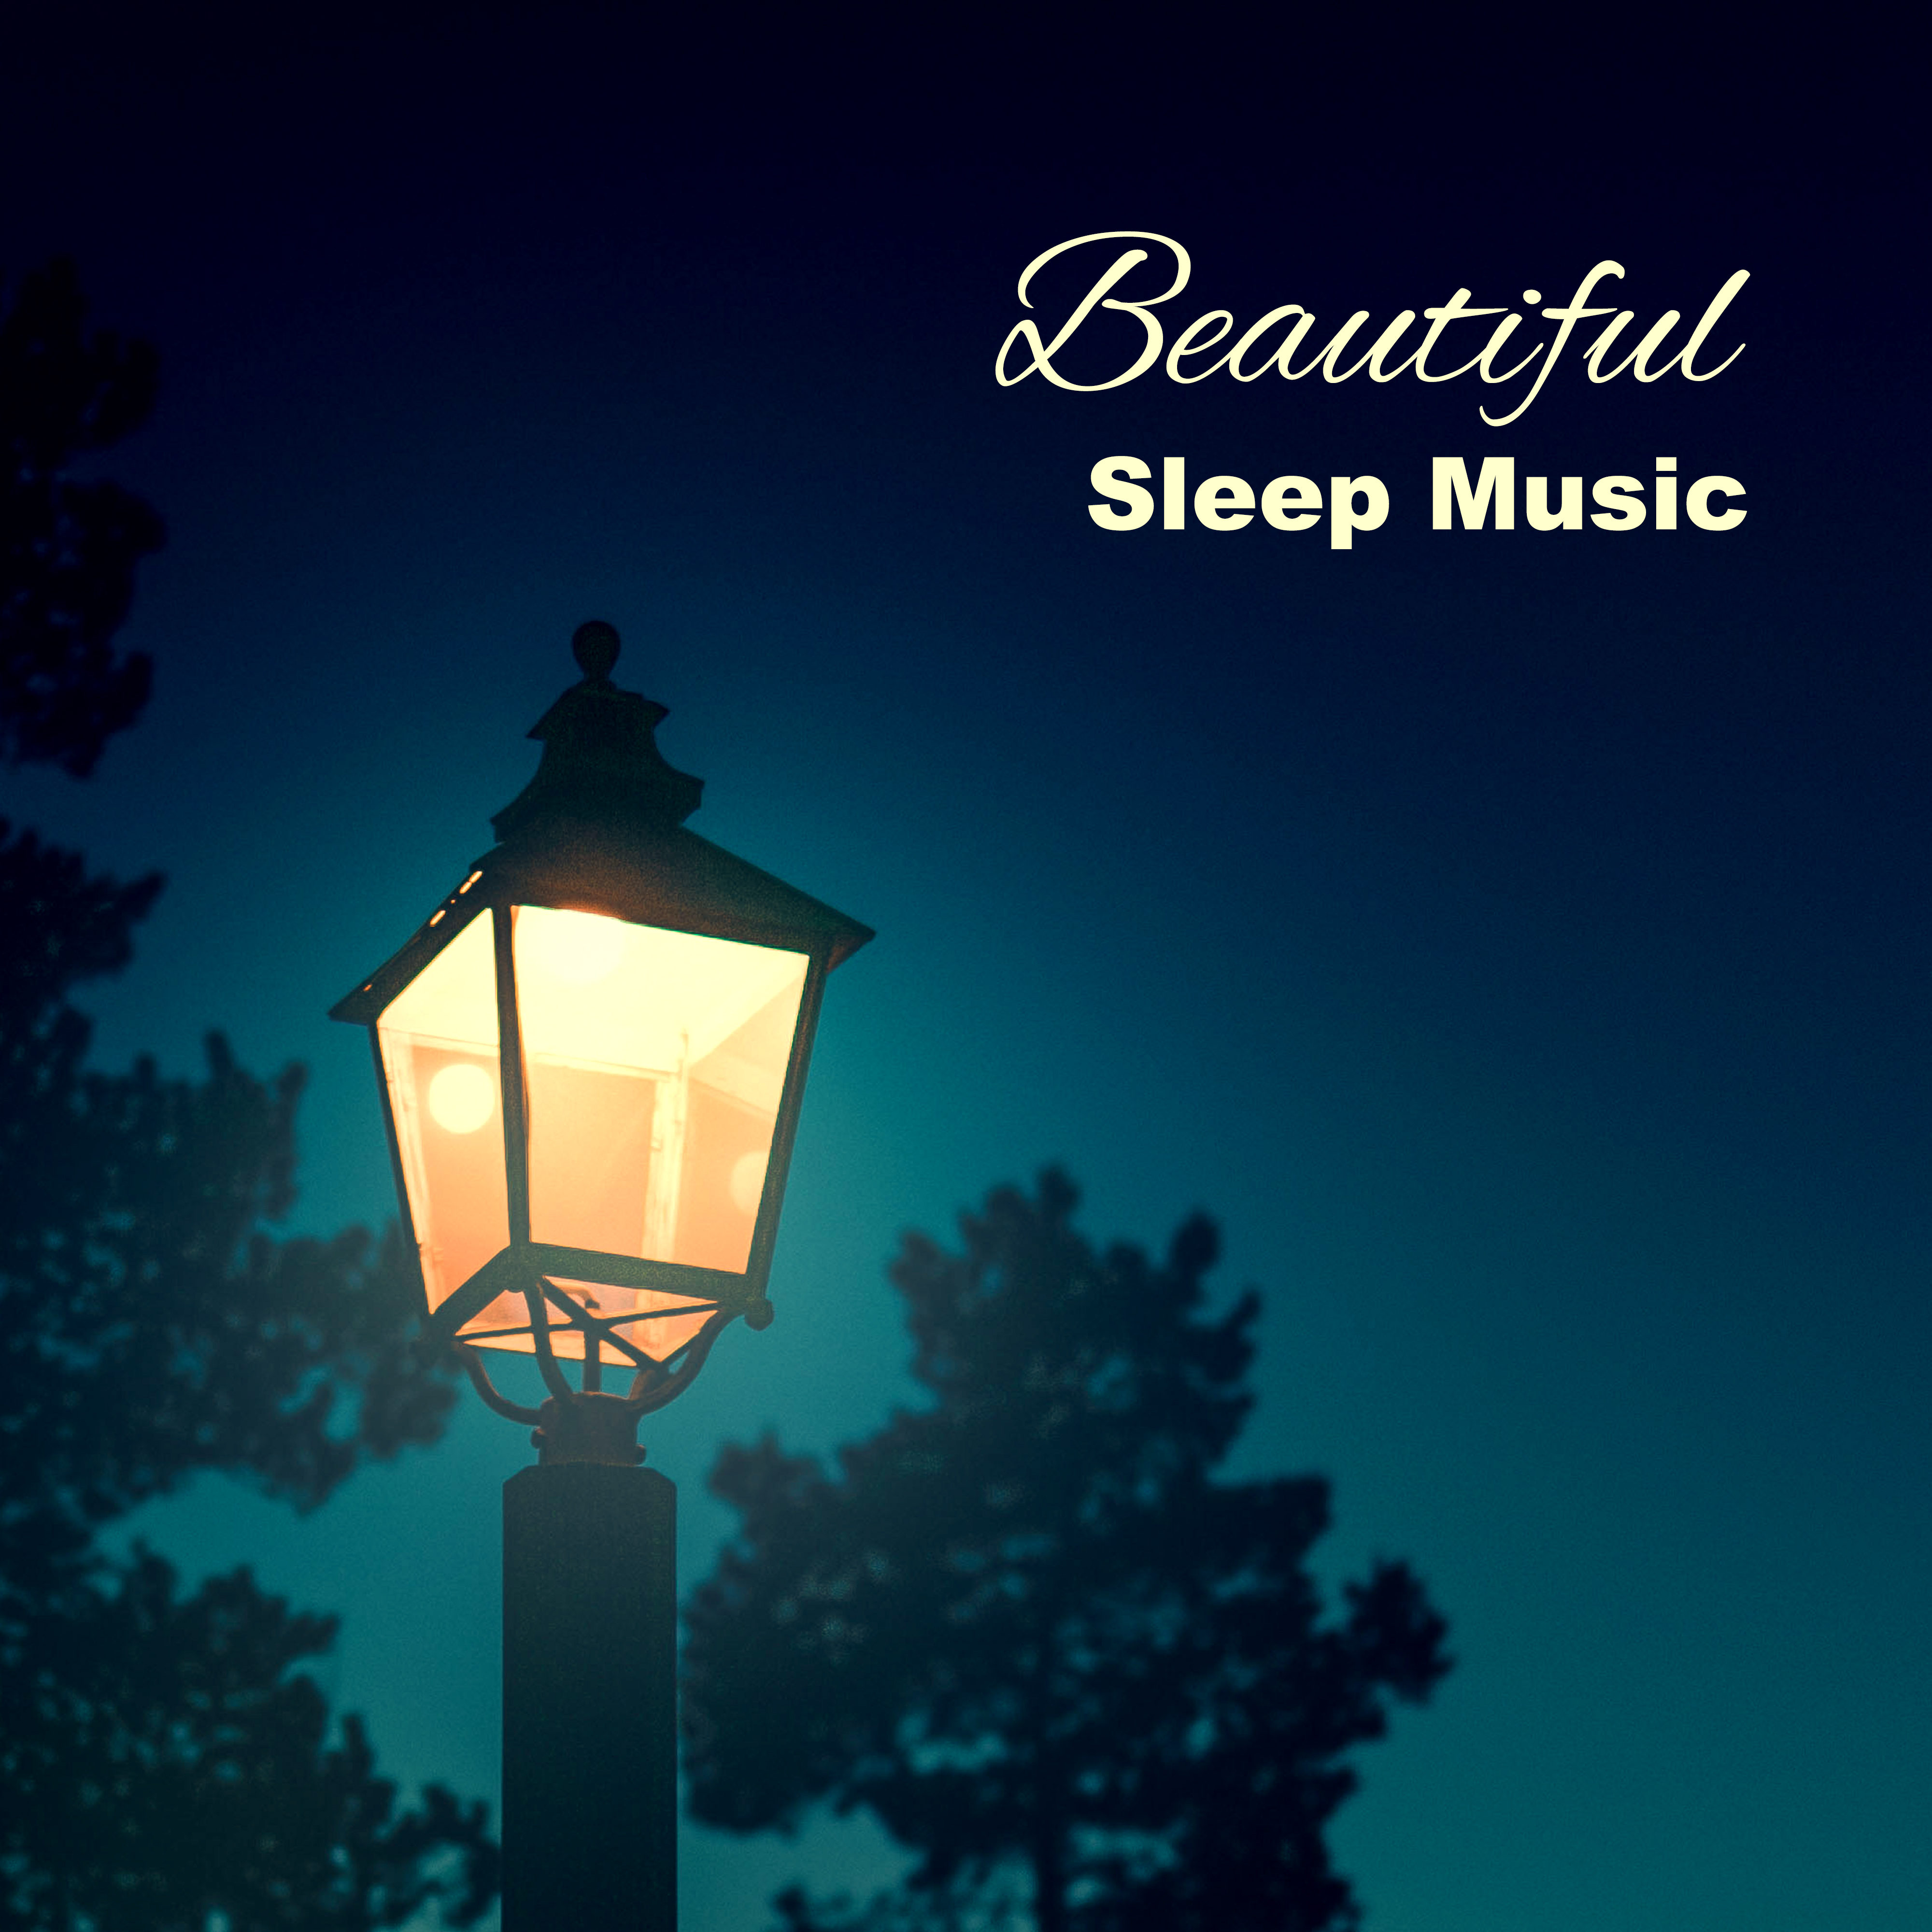 Beautiful Sleep Music – Classical Music to Fall Asleep, Rest with Classics Melodies, Famous Composers